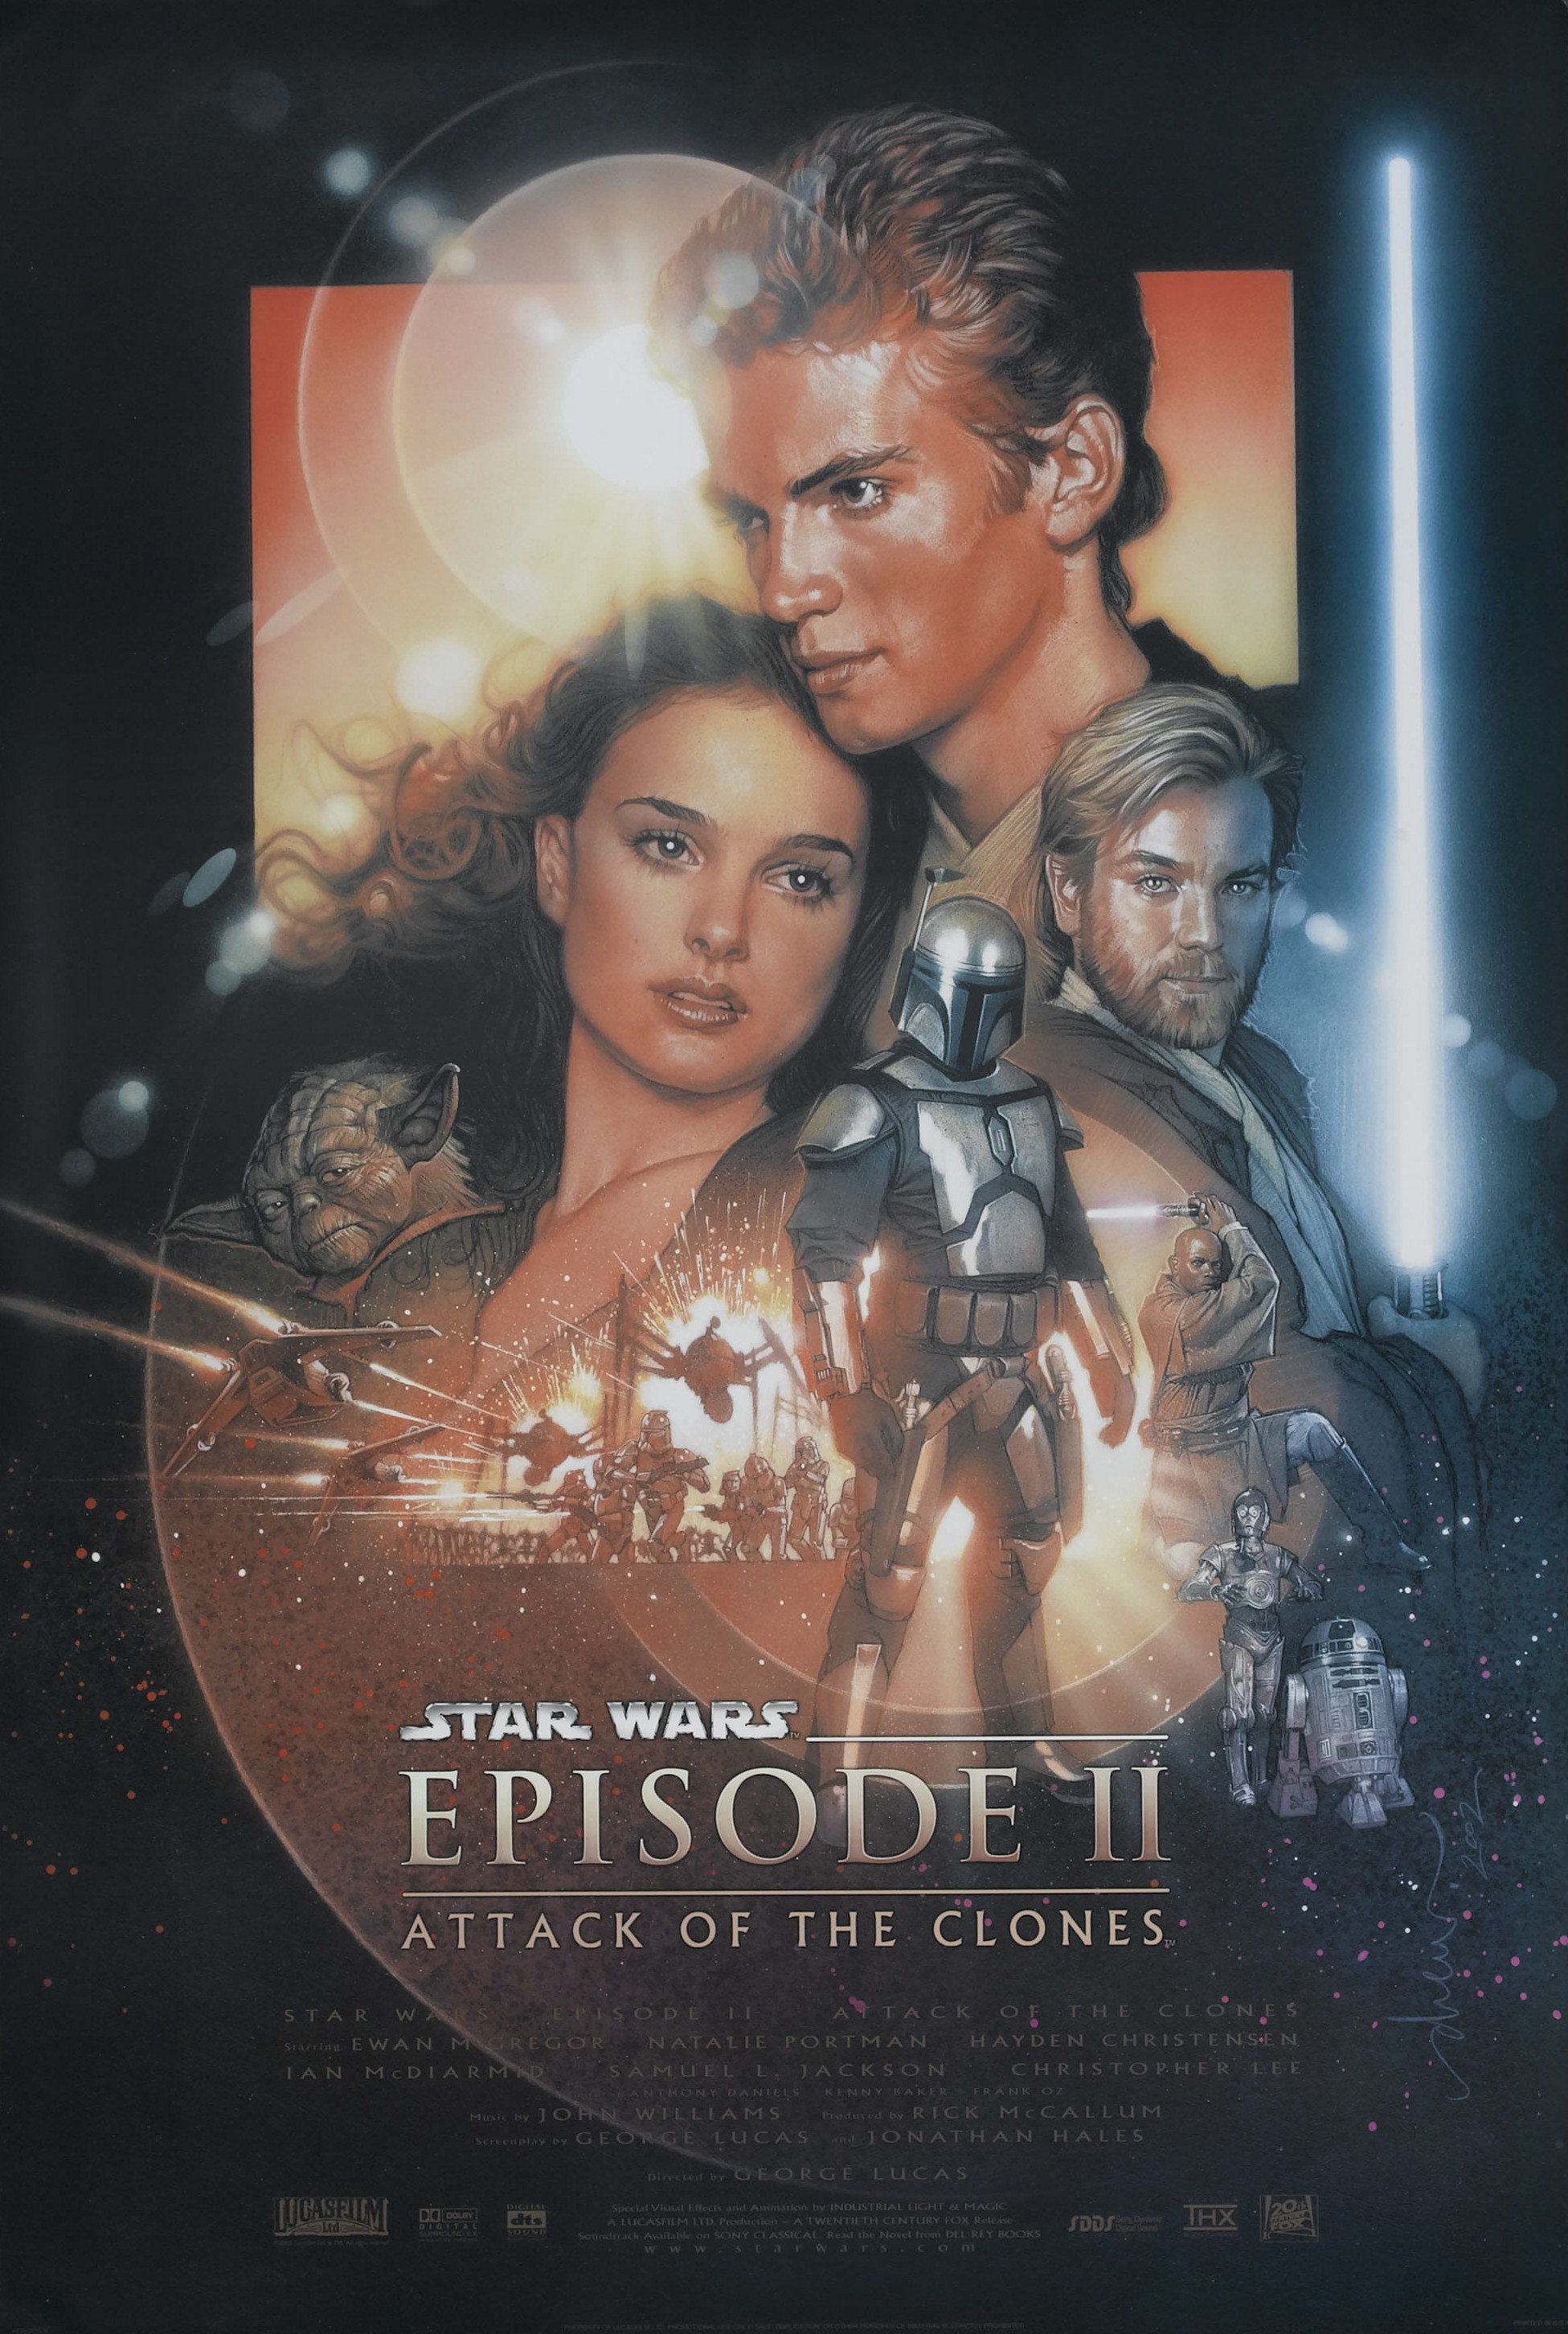 Star Wars Ep. II: Attack of the Clones